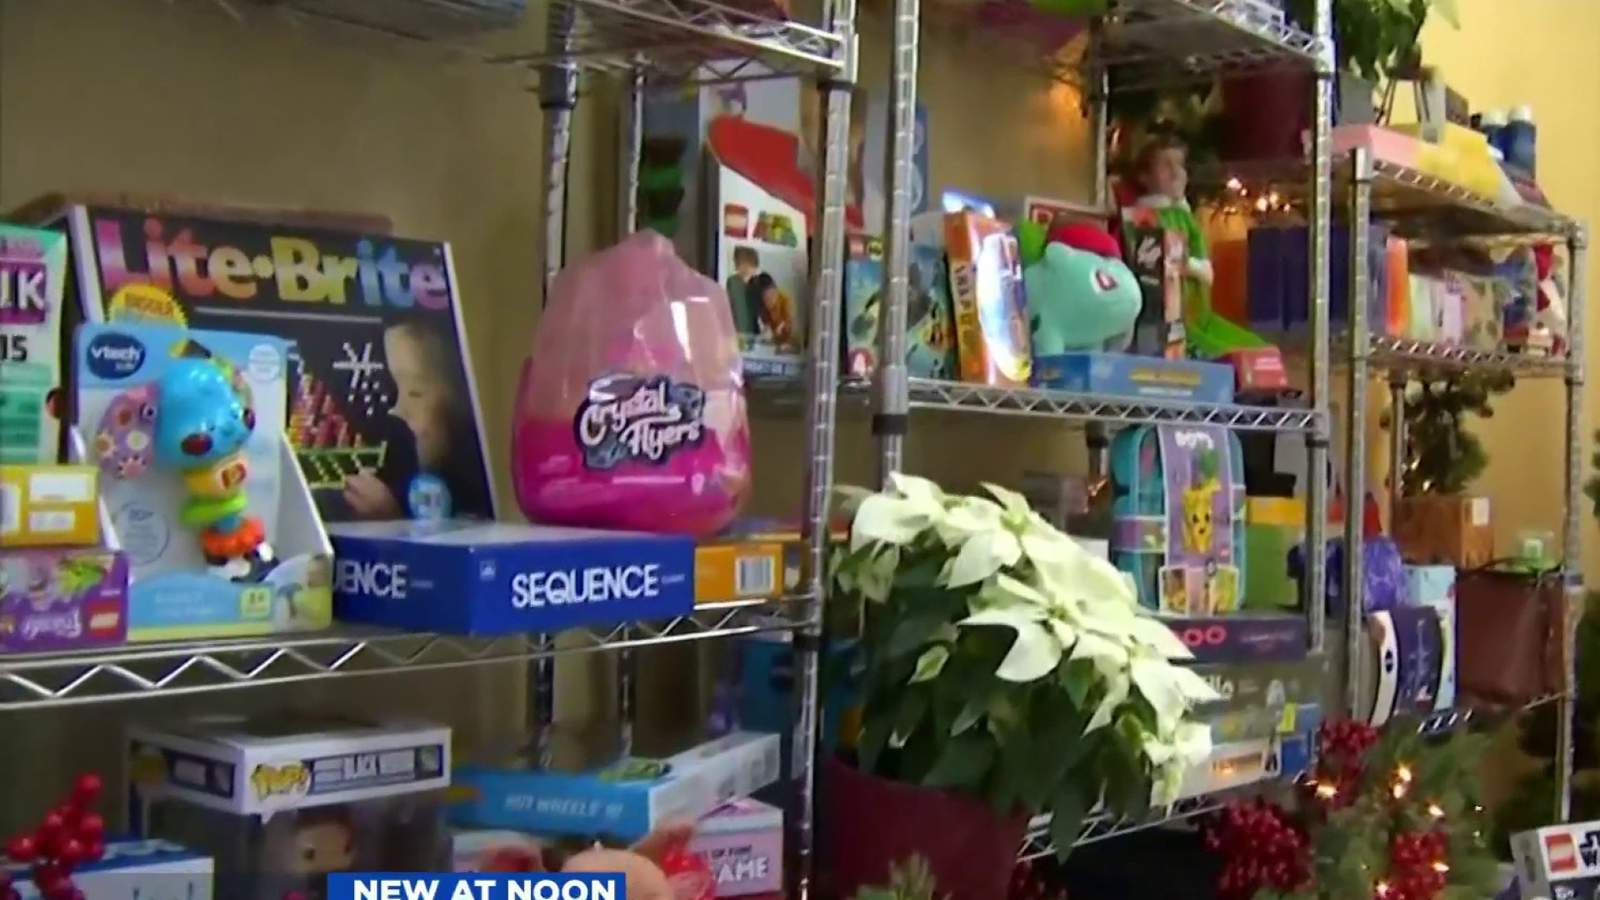 Amazon 4-Star donates gifts for victims of domestic violence